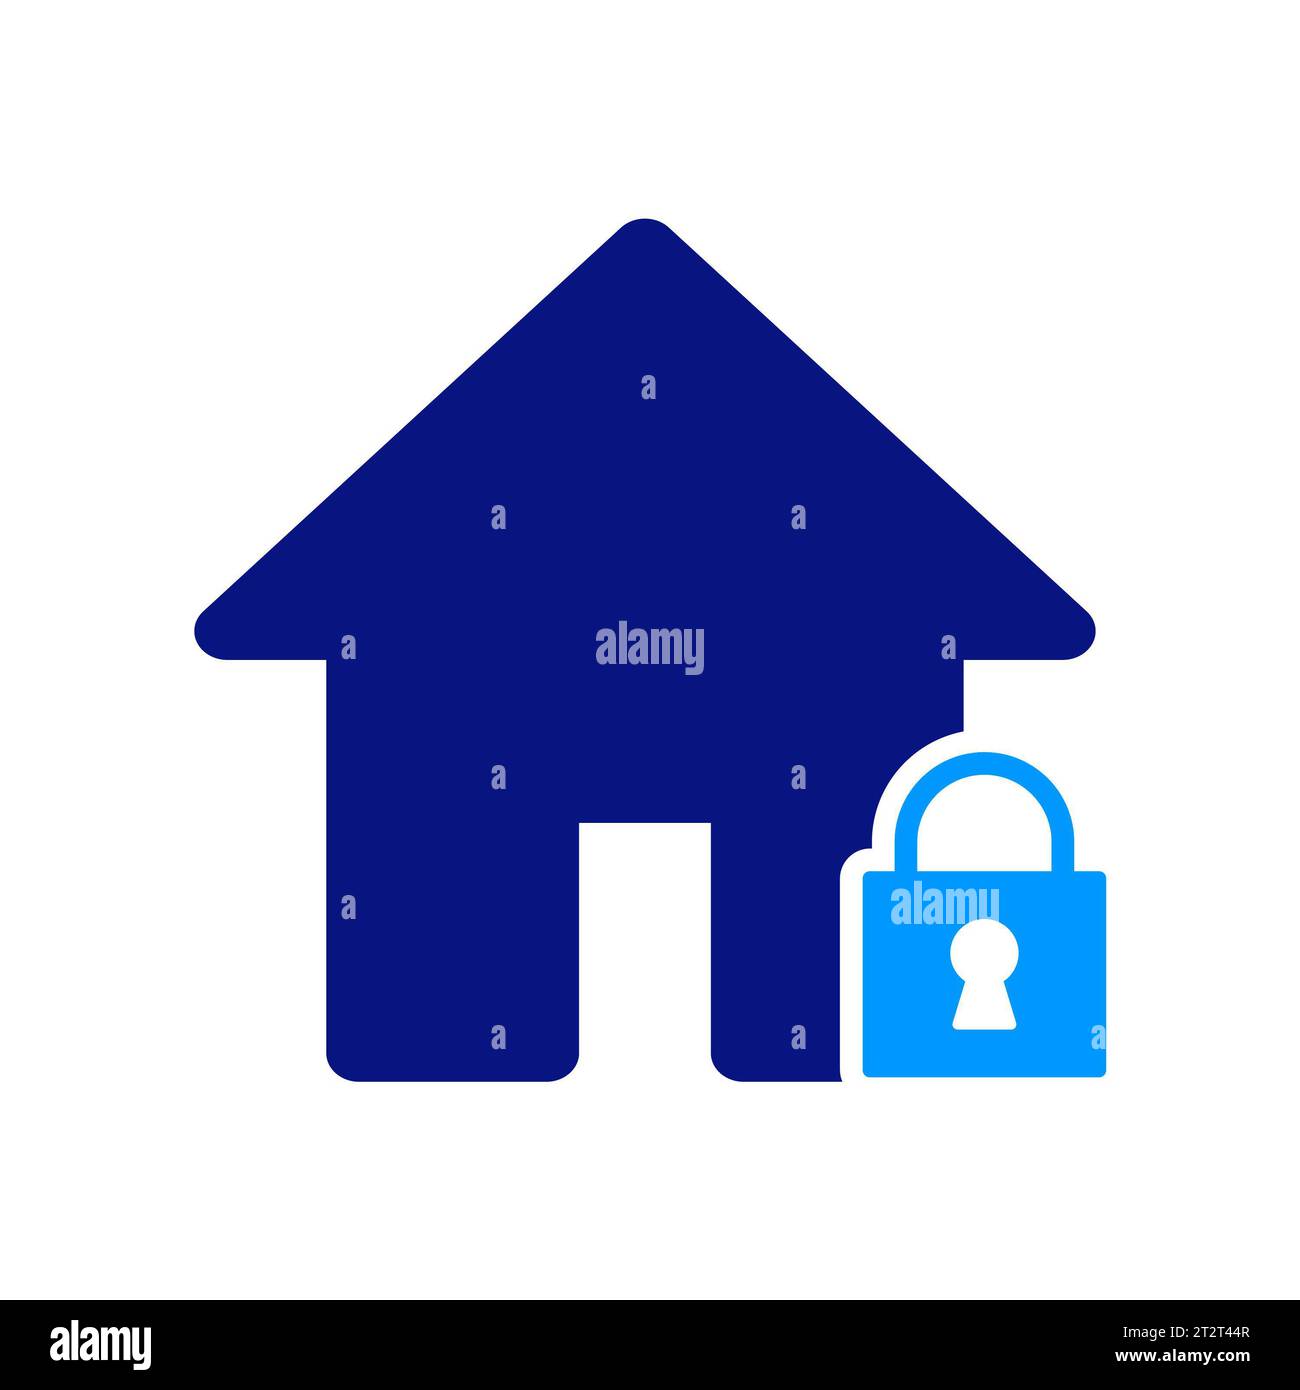 PROTECTOR OF YOUR FAMILY. Home Security, Protection, safety, security, protect, defense, House under protection. Smart Home, Lockdown. icon set. Stock Photo